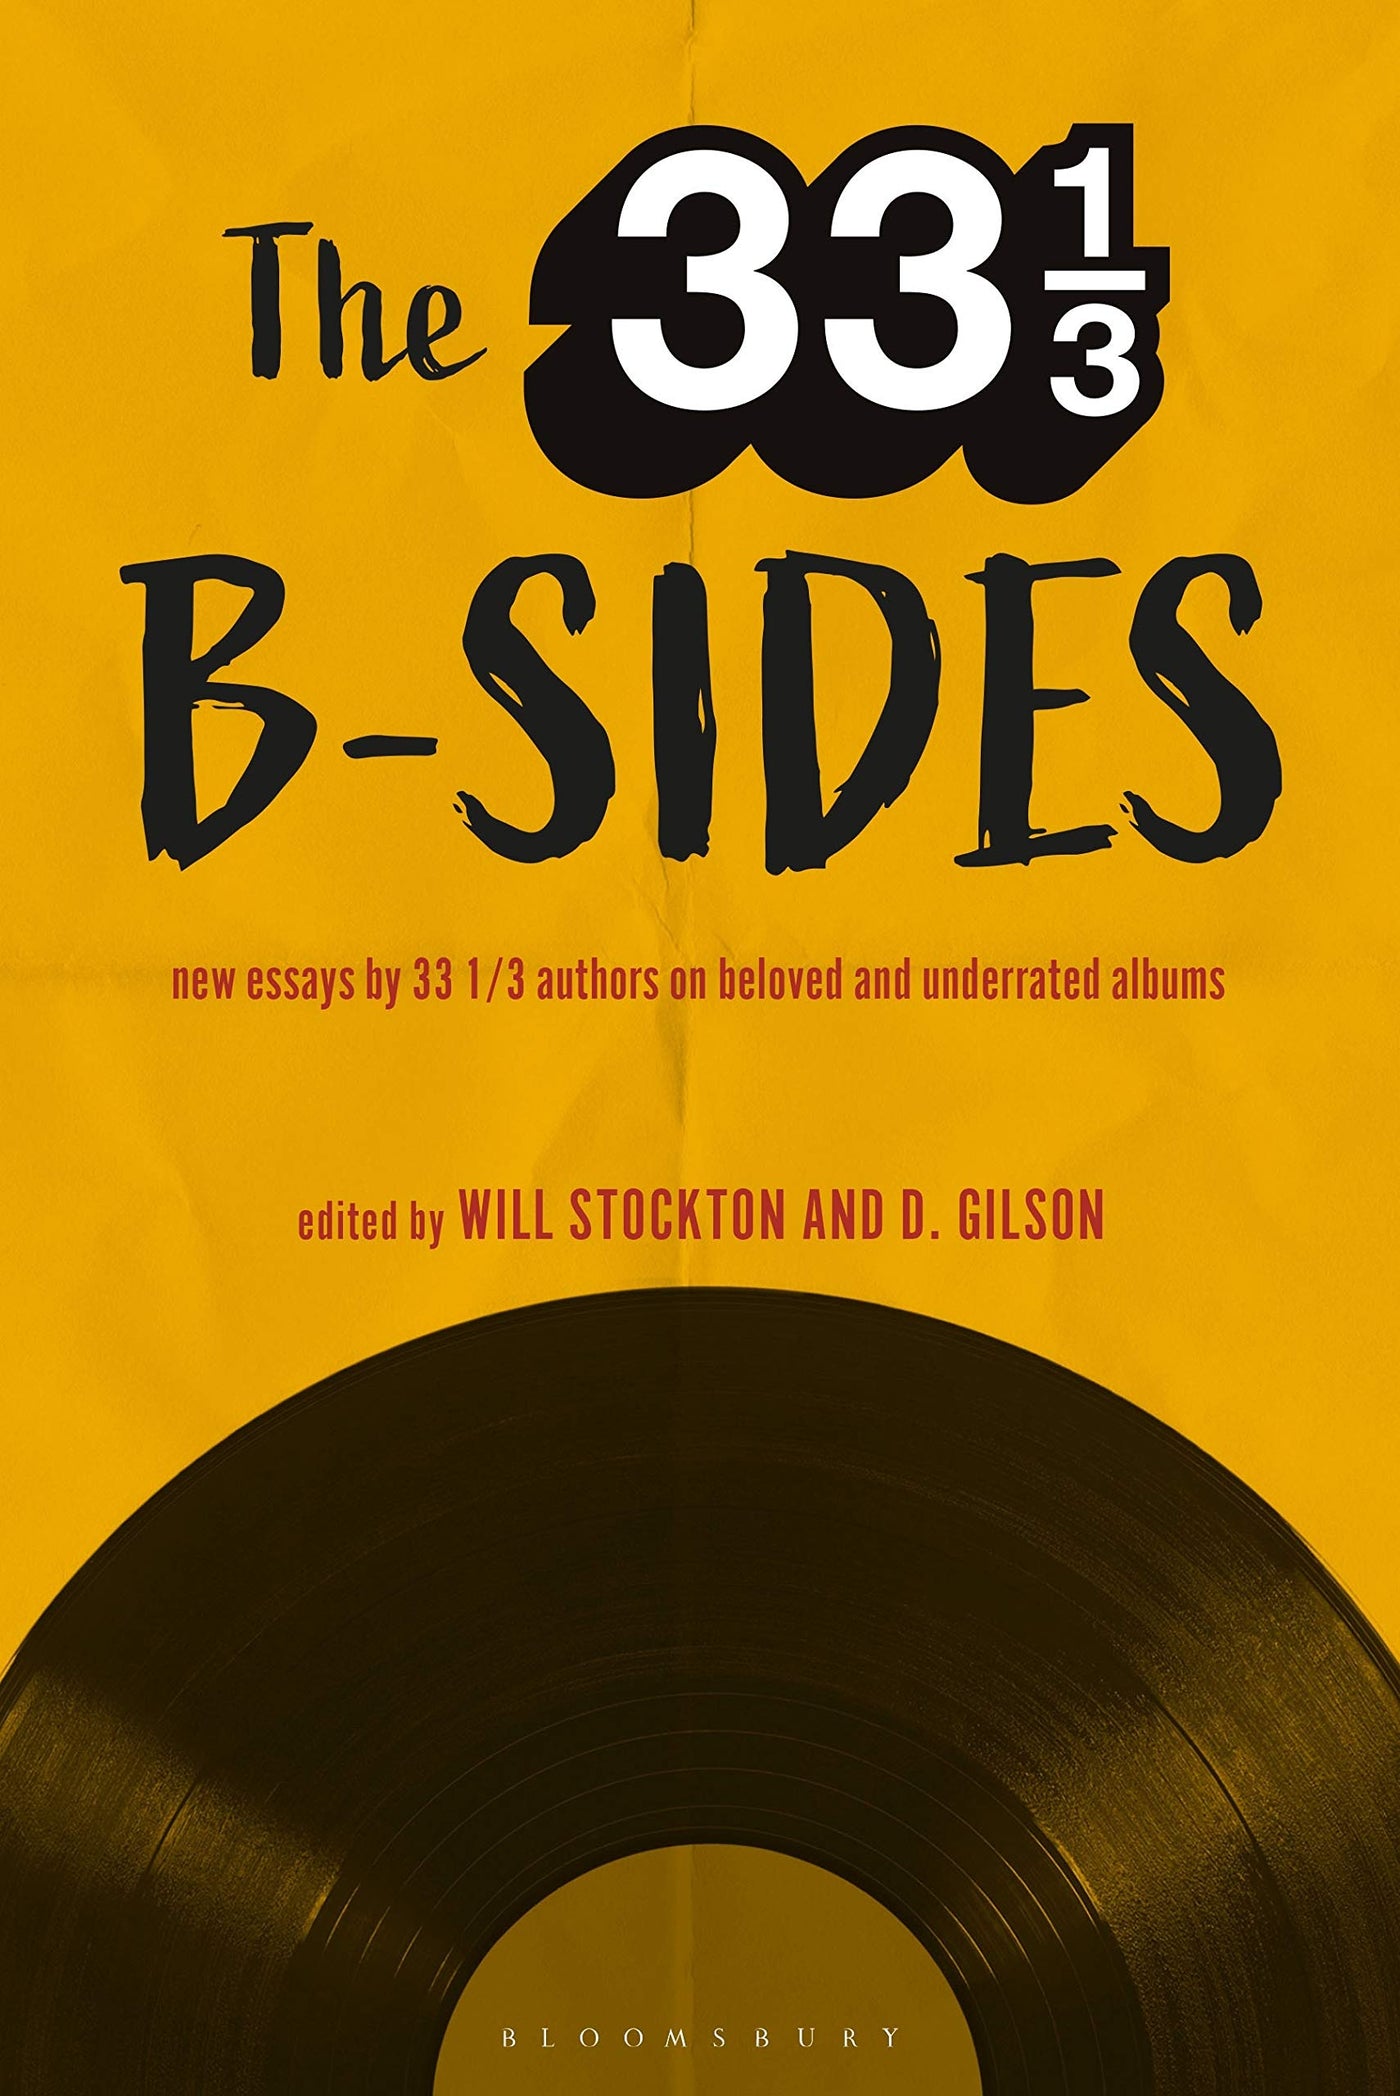 The 33 1/3 B-Sides: New Essays by 33 1/3 Authors on Beloved and Underrated Albums edited by Will Stockton, D. Gilson